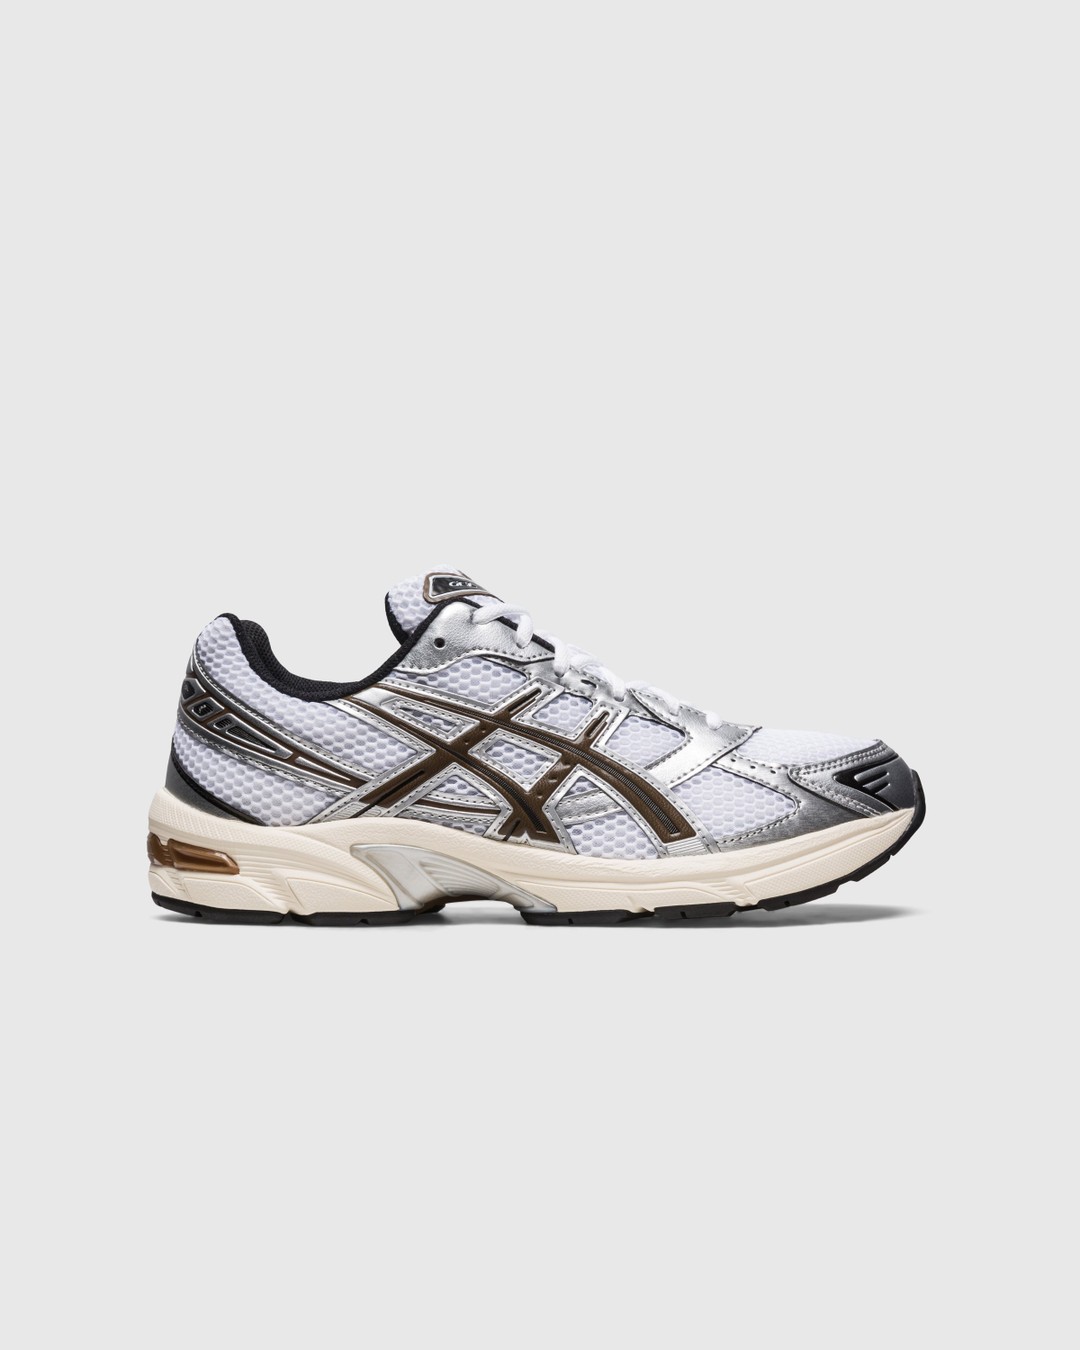 asics – GEL-1130 White/Clay Canyon - Sneakers - White - Image 1